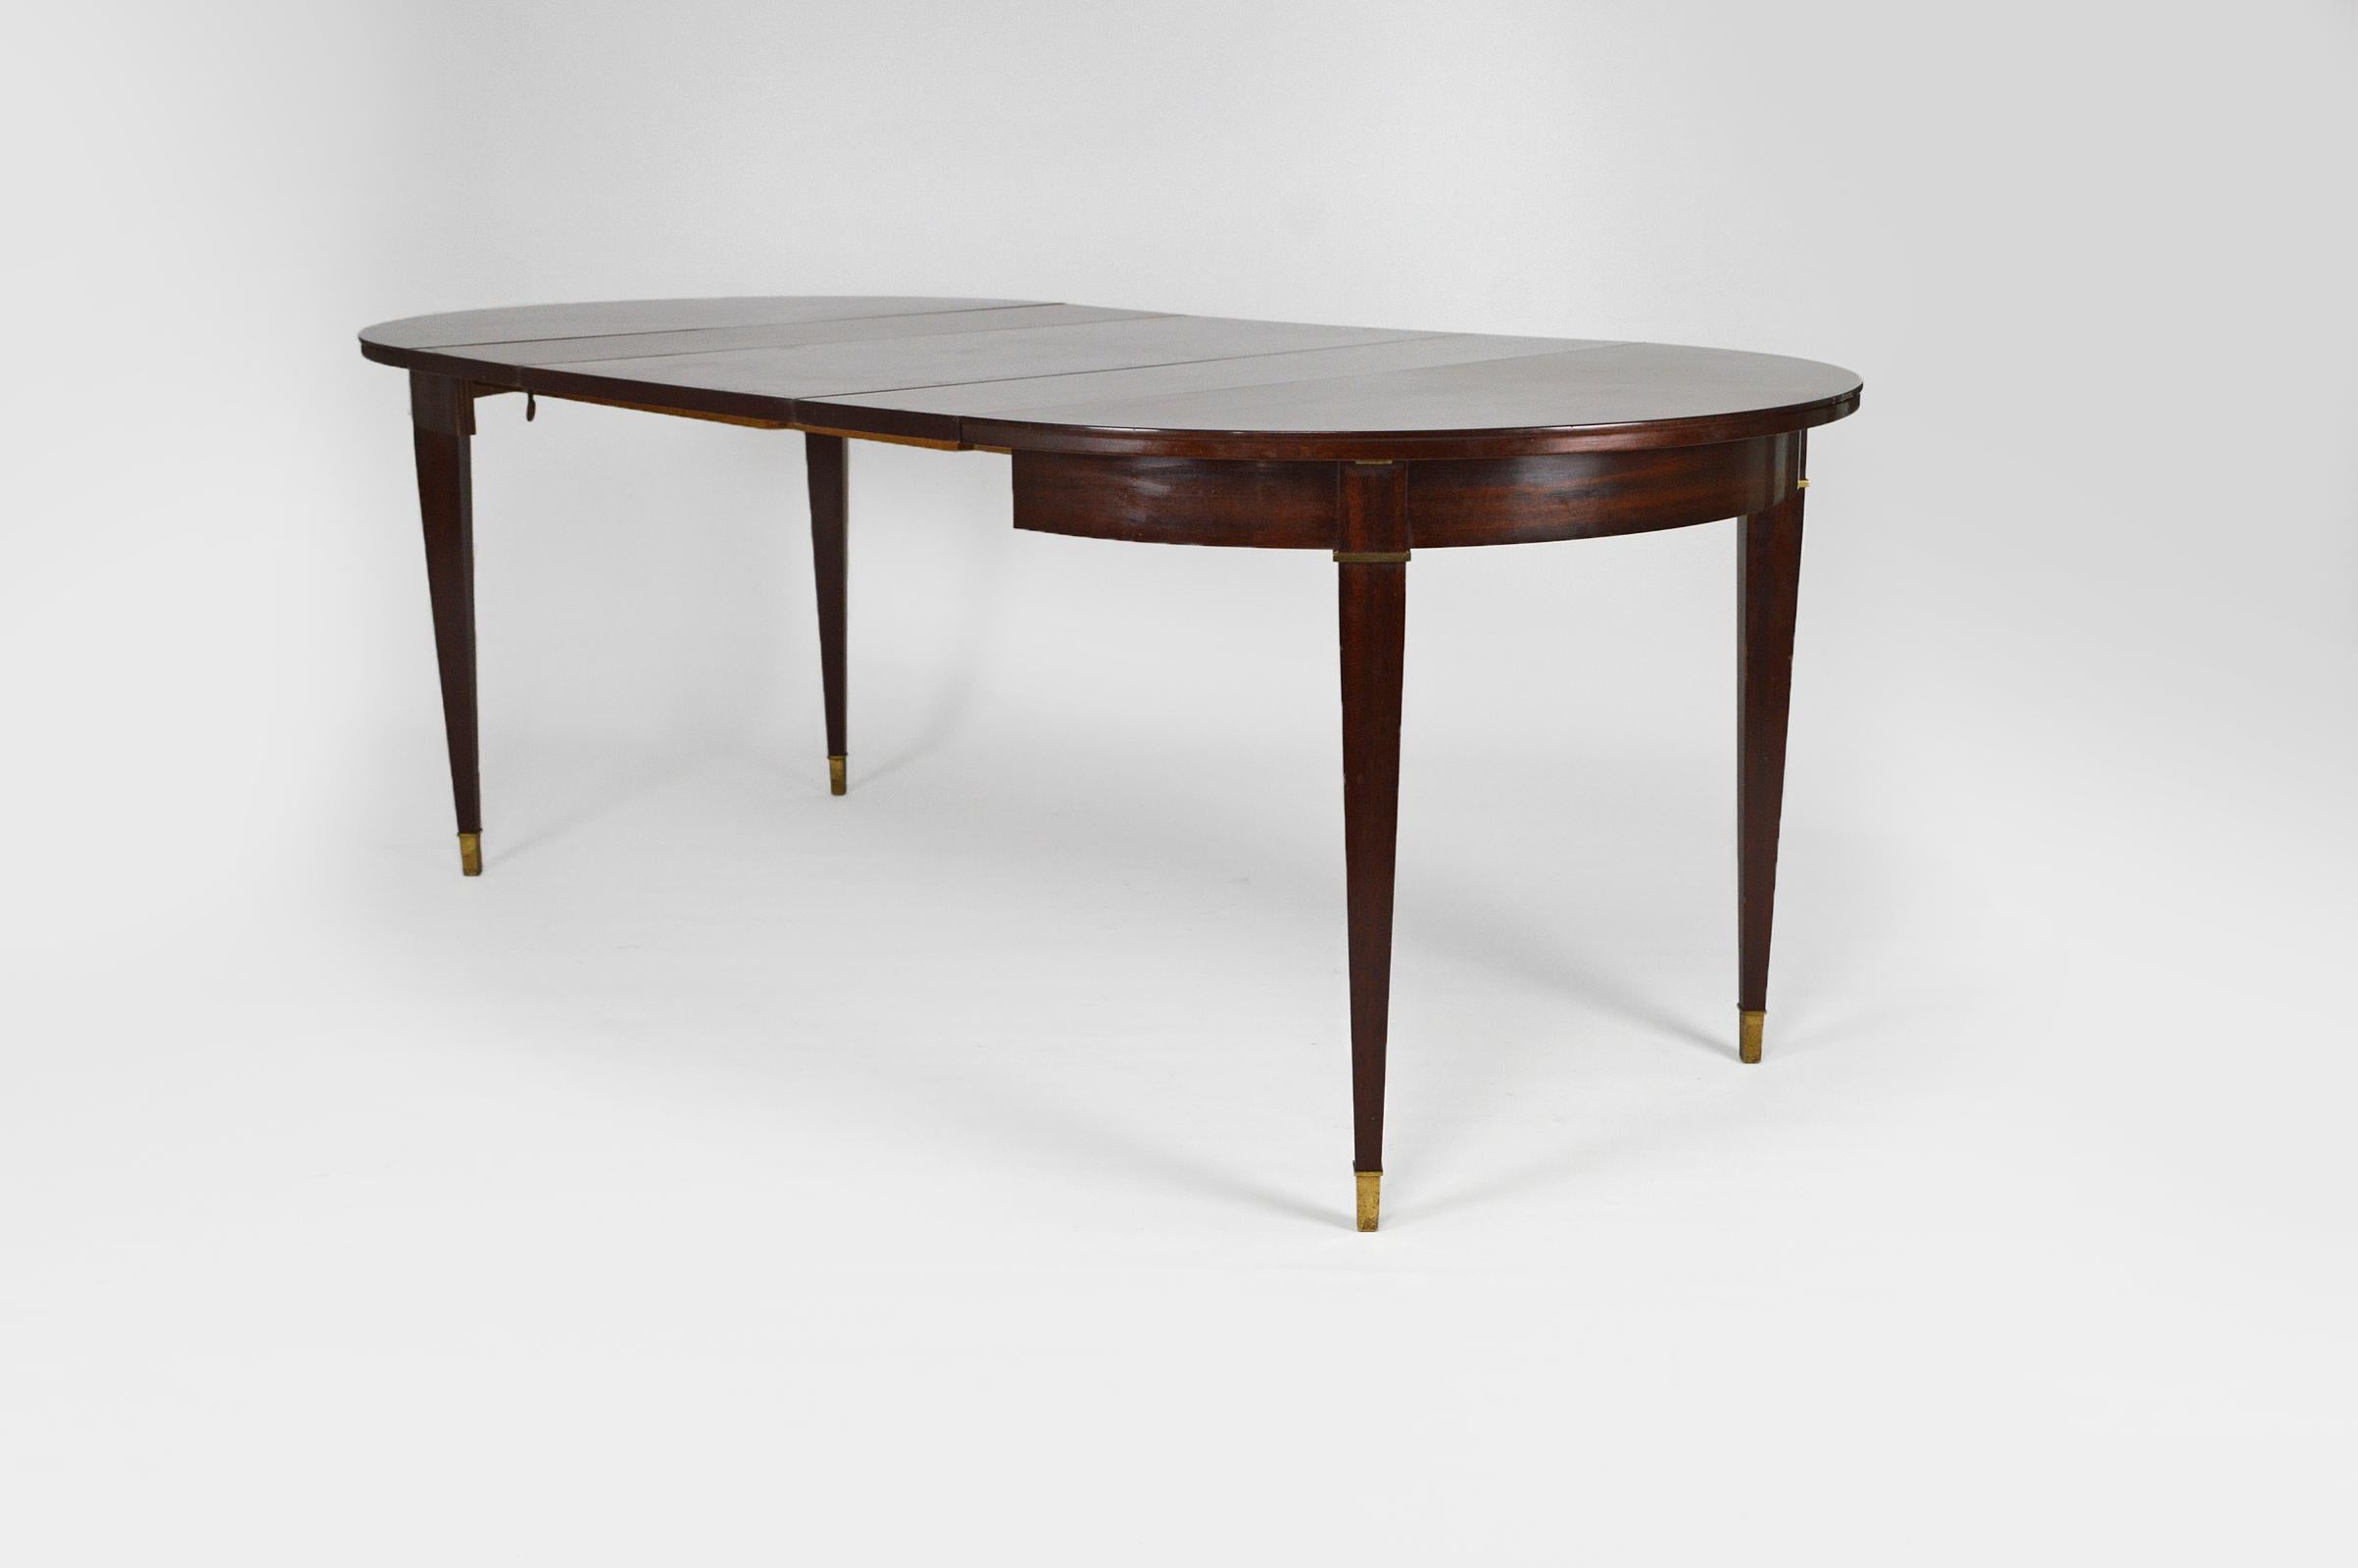 Art Deco Mahogany Round Table with Extensions, by Jacques Adnet, circa 1940 For Sale 4